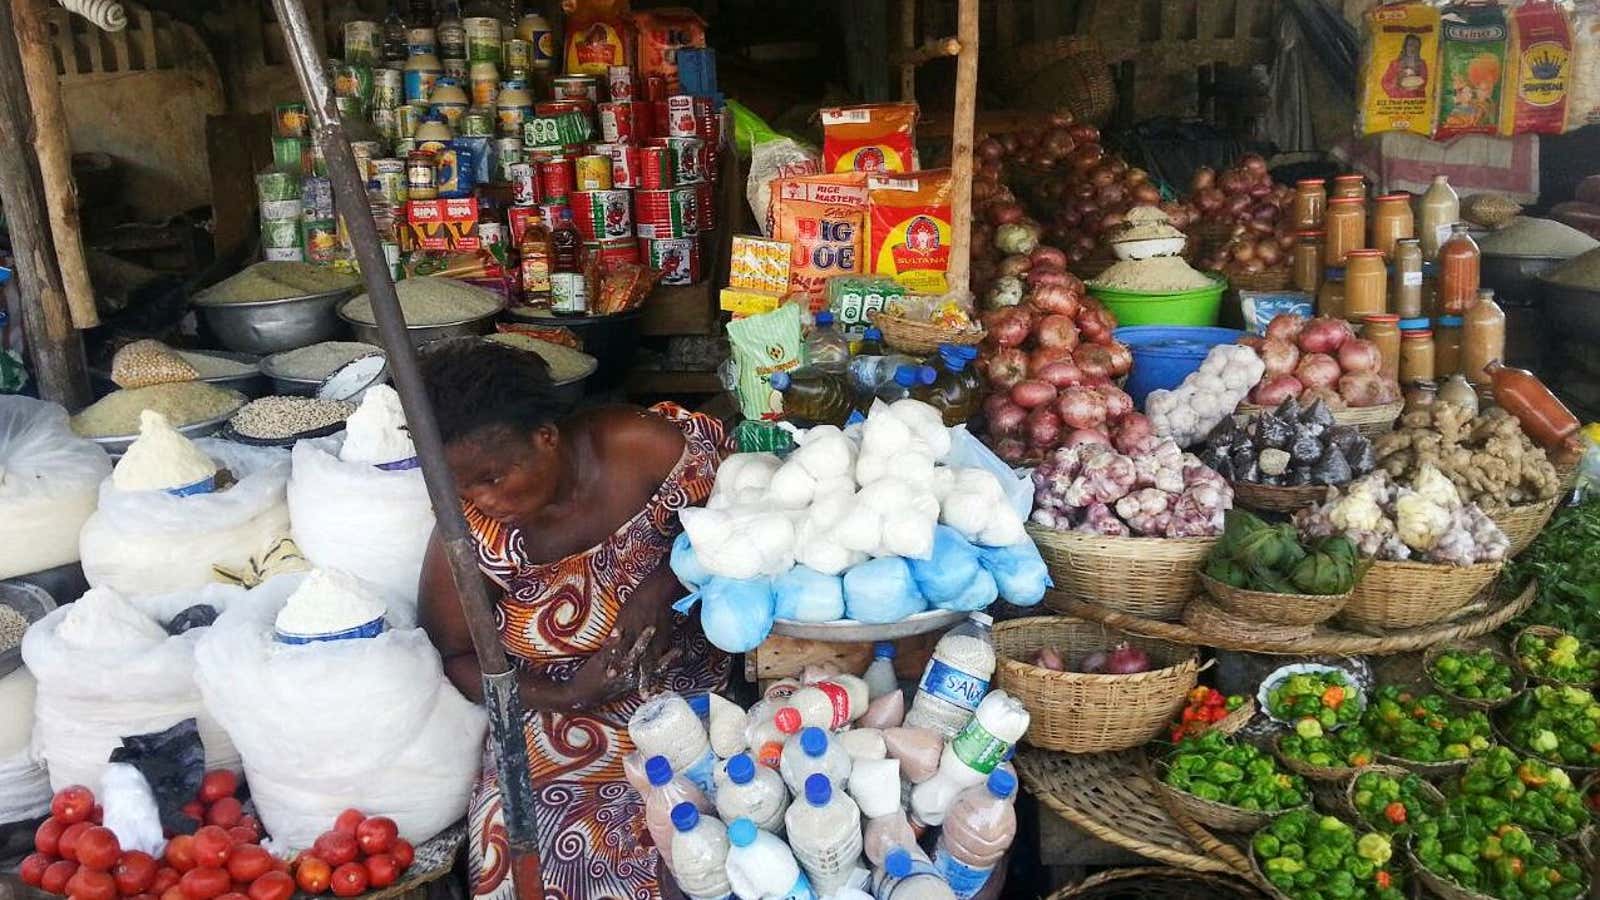 A woman sits in her market stall in Cotonou, Benin amid piles of merchandise